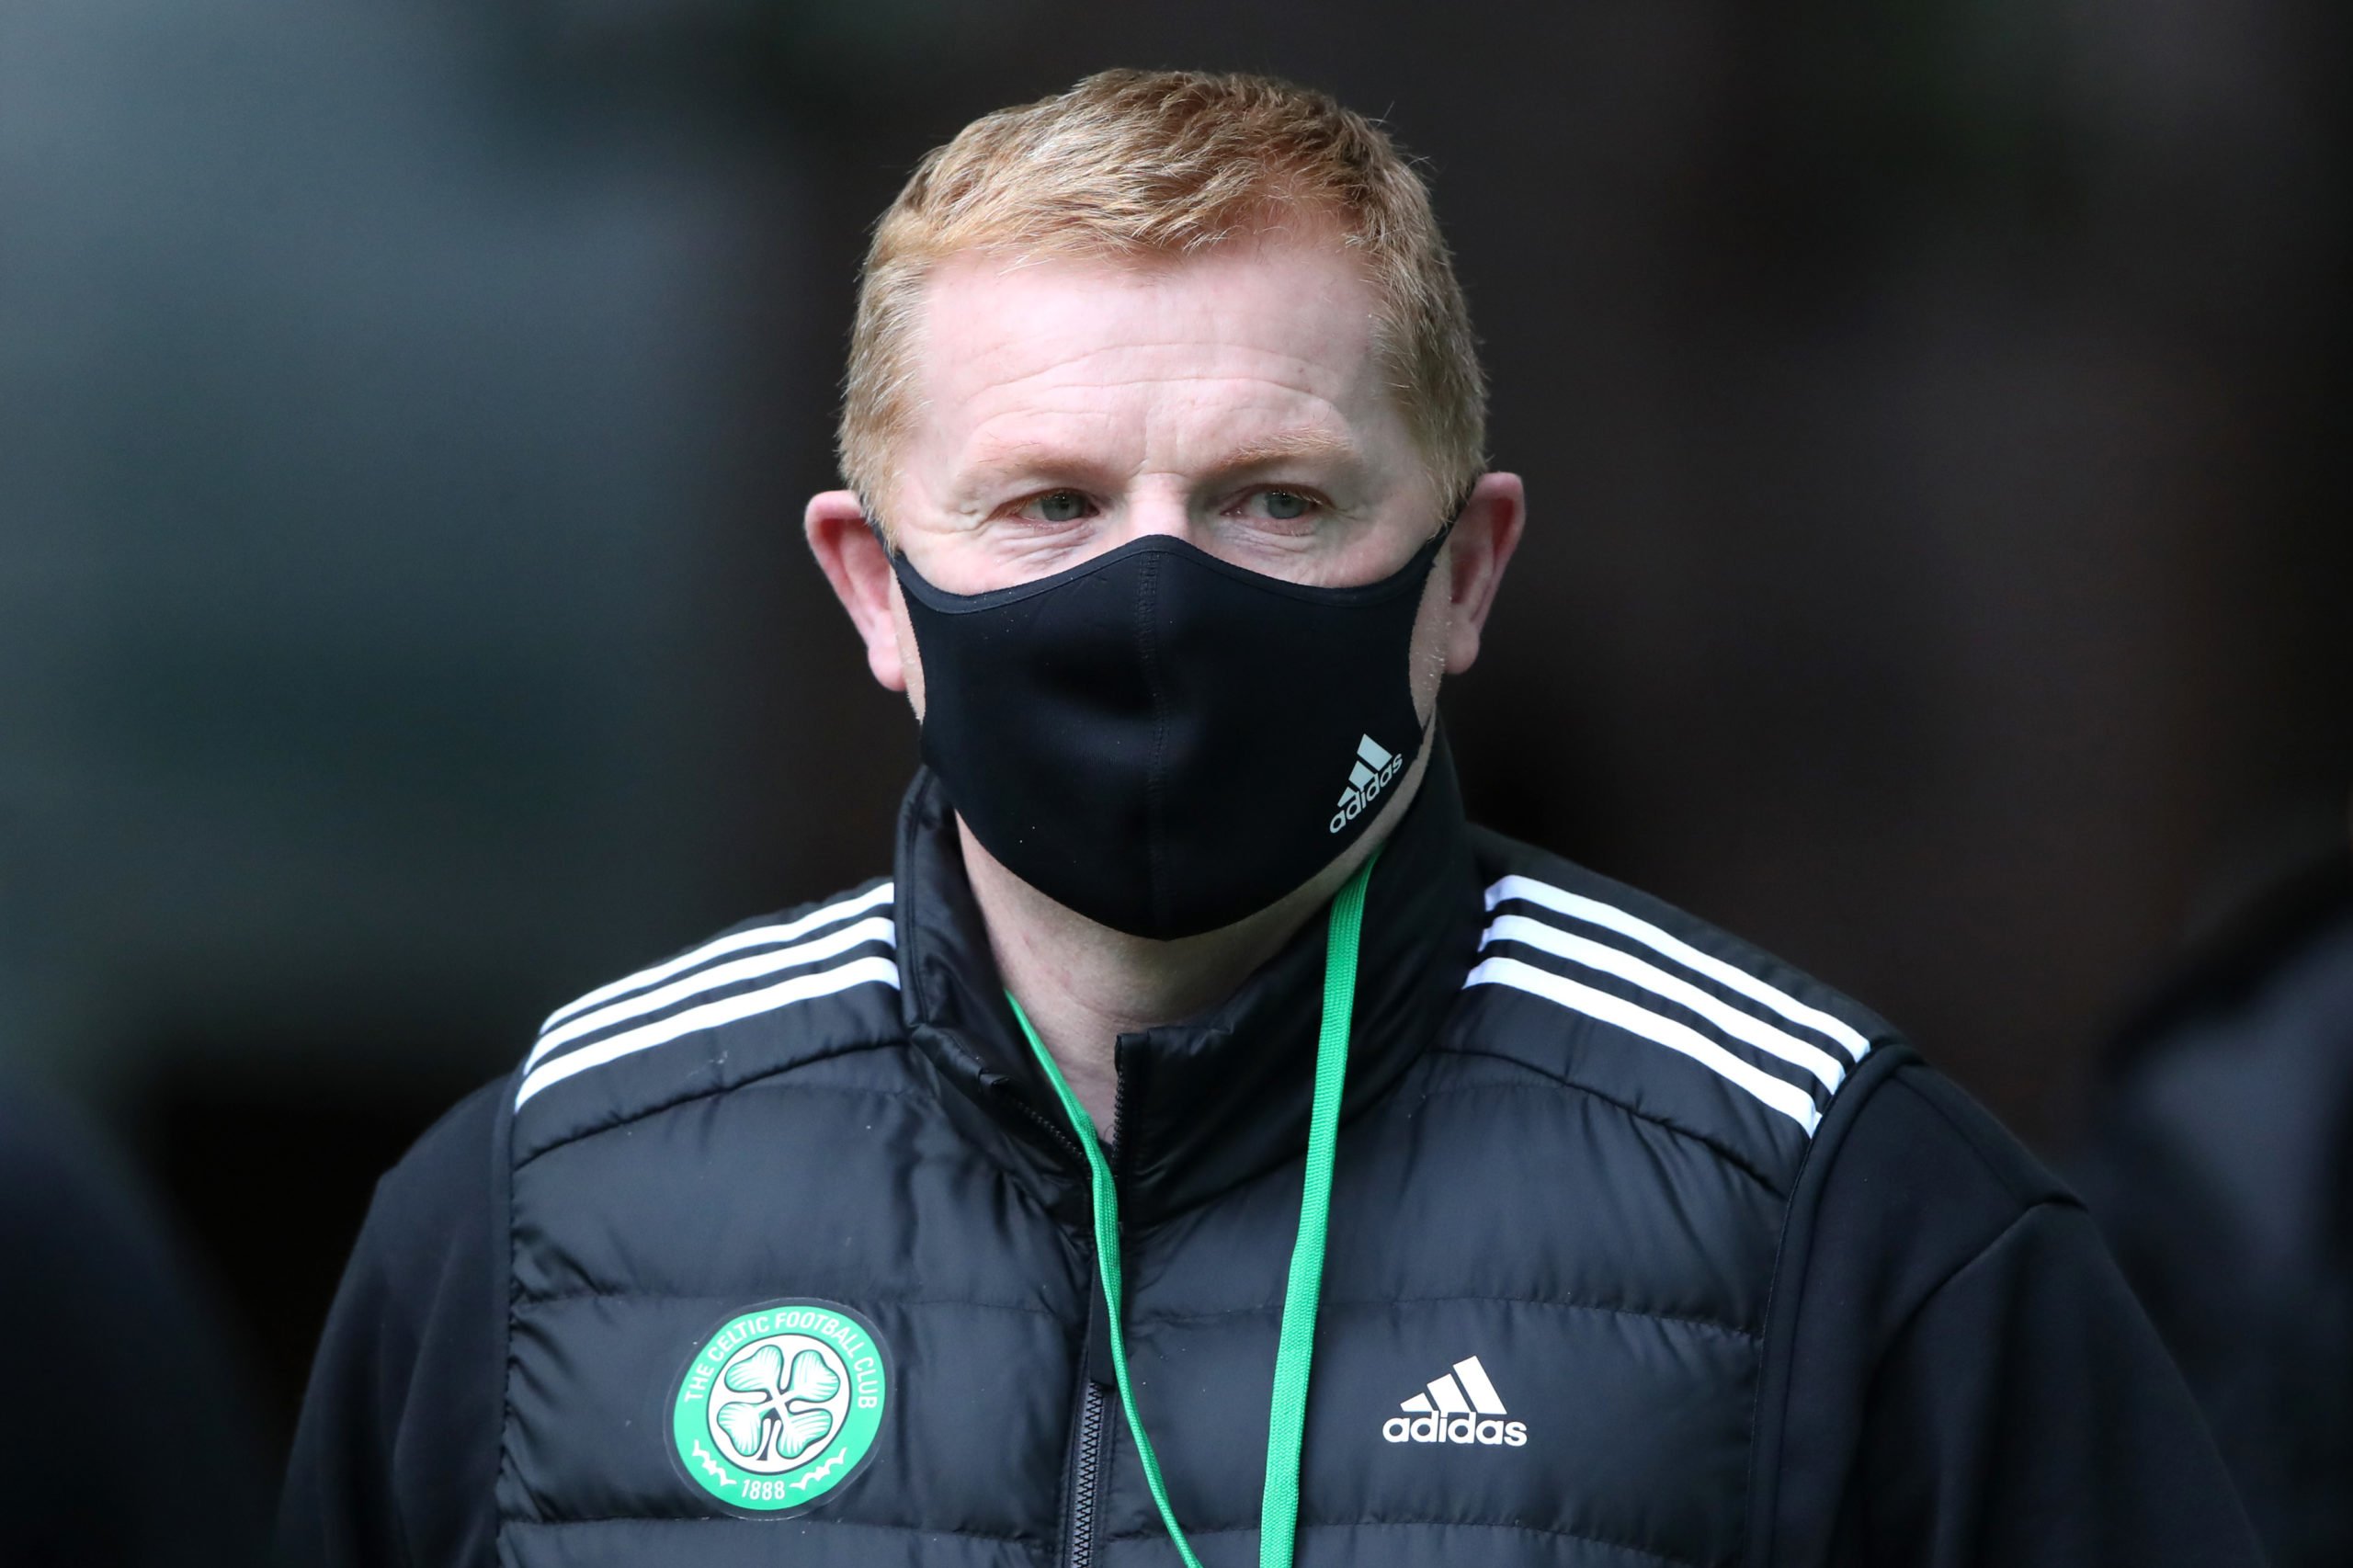 Neil Lennon's agent Martin Reilly argues with Celtic fans on Twitter; defends Hoops boss